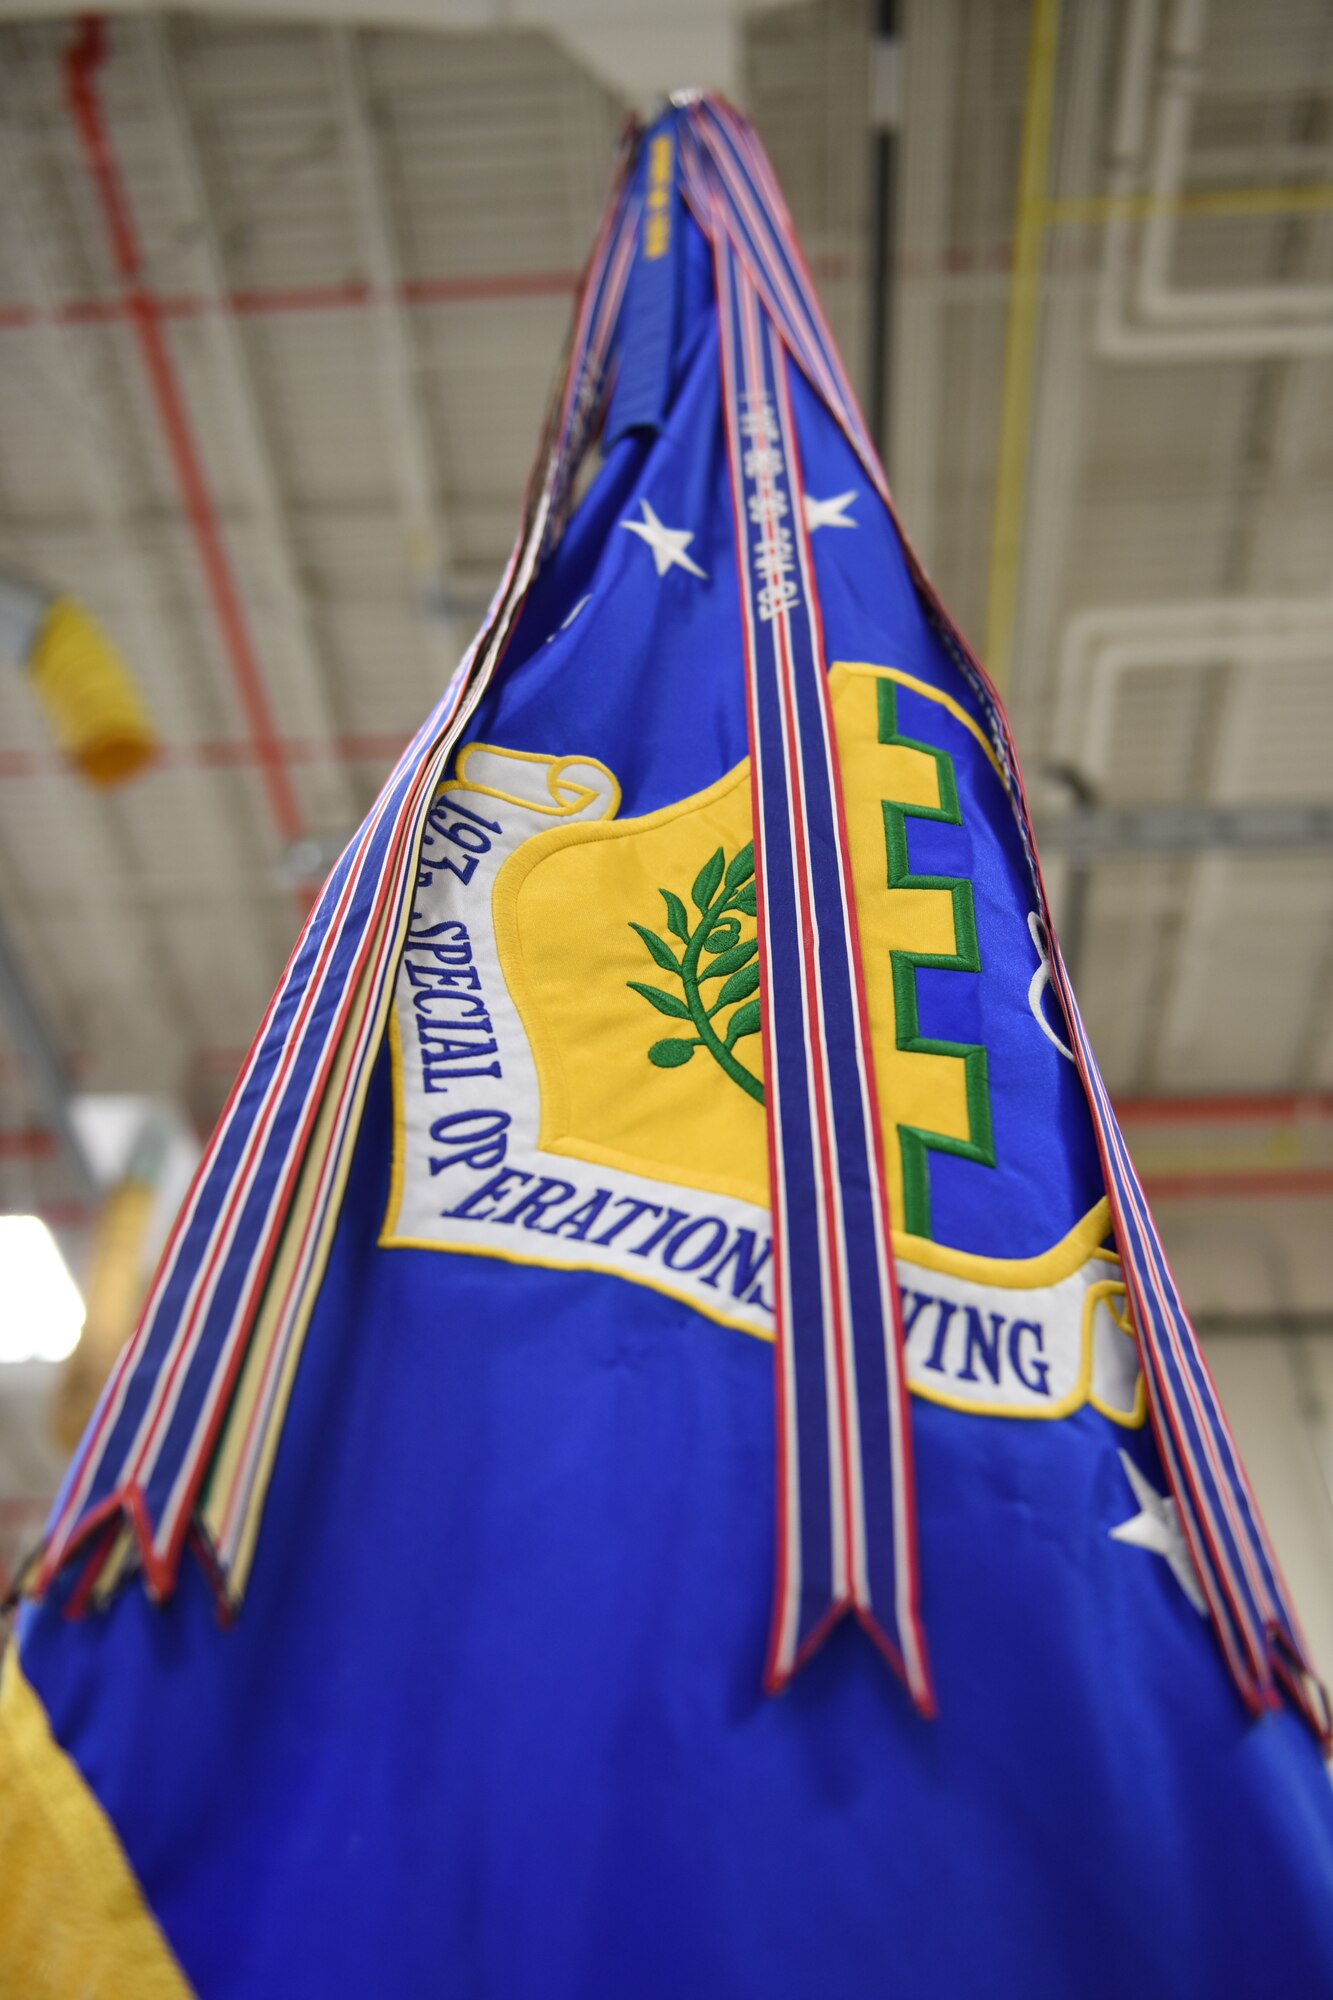 A new streamer will be added to the 193rd Special Operations Wing flag as a result of the unit's recent receipt of the 2015 Air Force Outstanding Unit Award. This streamer will join 16 others of its kind, showing the accomplishments of the wing. This honor of the AFOUA goes to units that have distinguished themselves through exceptional meritorious service or outstanding achievement that clearly sets them above and apart from their counterparts. (U.S. Air National Guard photo by Staff Sgt. Claire Behney/Released)